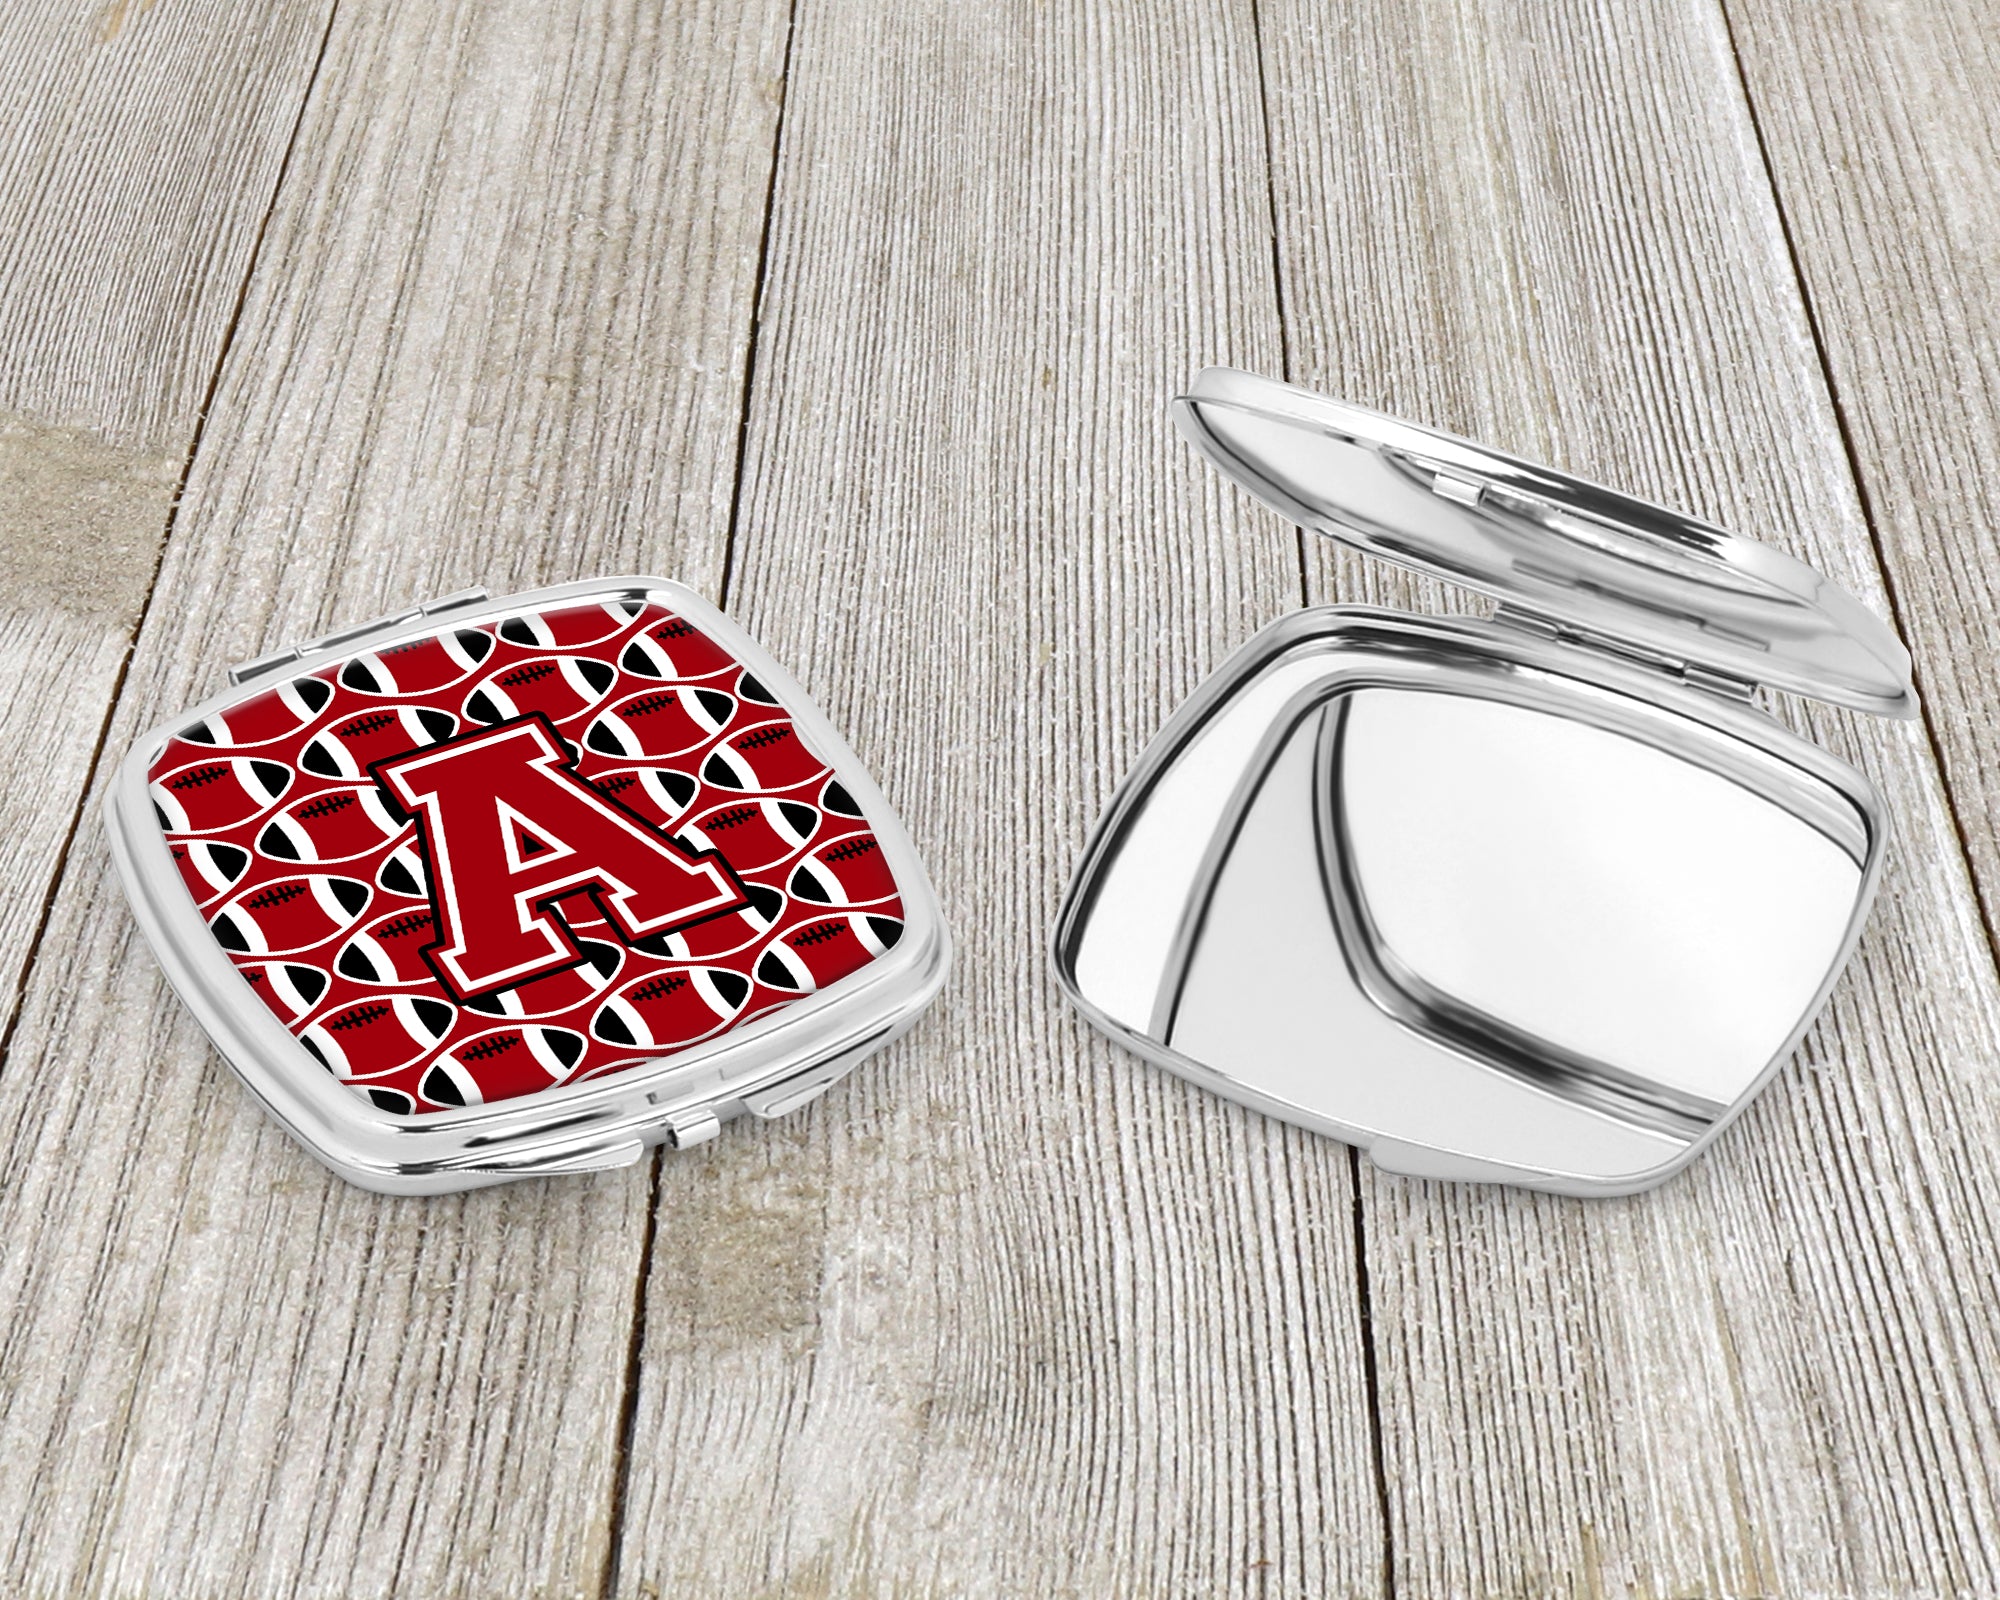 Letter A Football Red, Black and White Compact Mirror CJ1073-ASCM